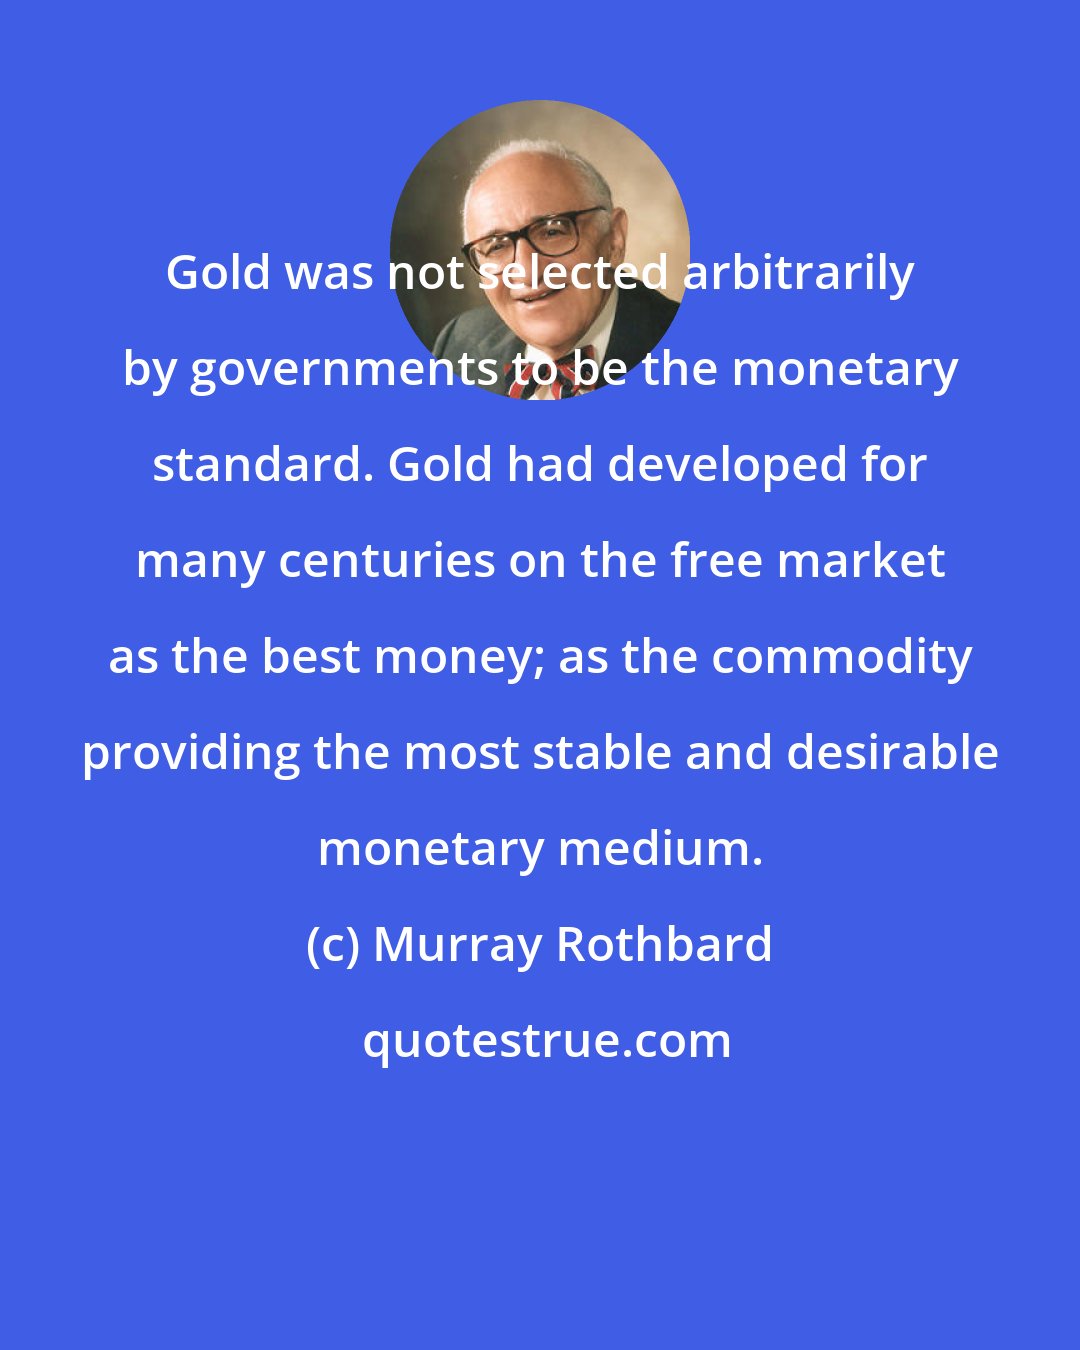 Murray Rothbard: Gold was not selected arbitrarily by governments to be the monetary standard. Gold had developed for many centuries on the free market as the best money; as the commodity providing the most stable and desirable monetary medium.